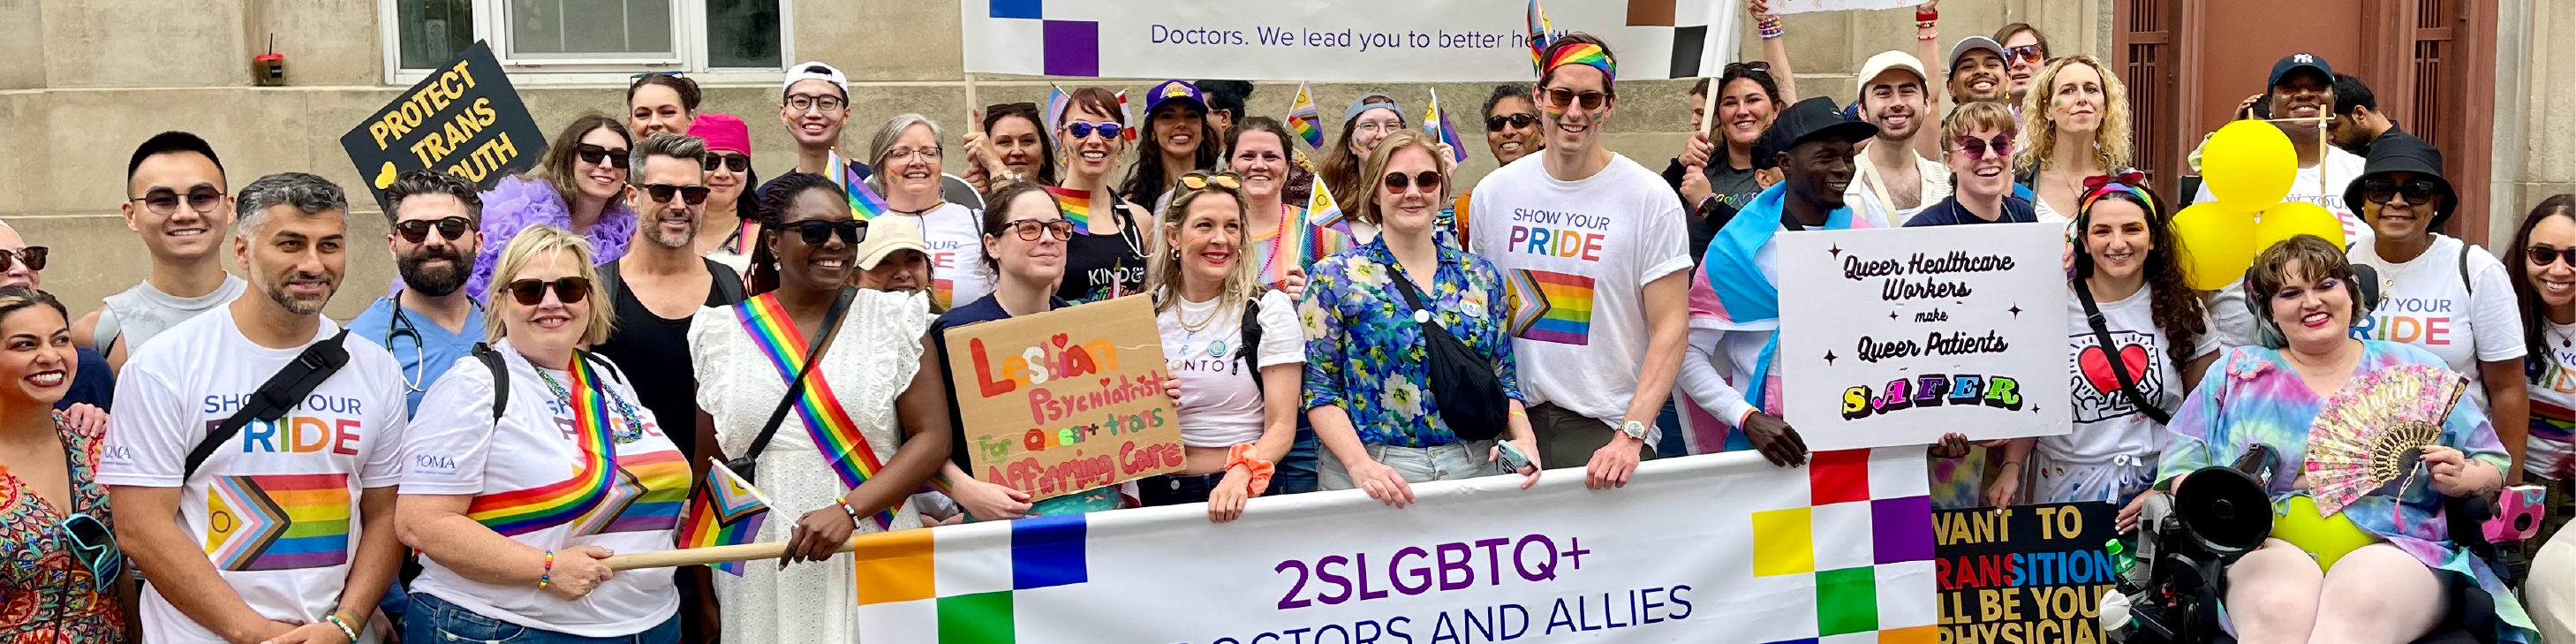 A large group of people wearing multicoloured clothing, with many holding signs, pose together with an OMA sign to celebrate Pride.